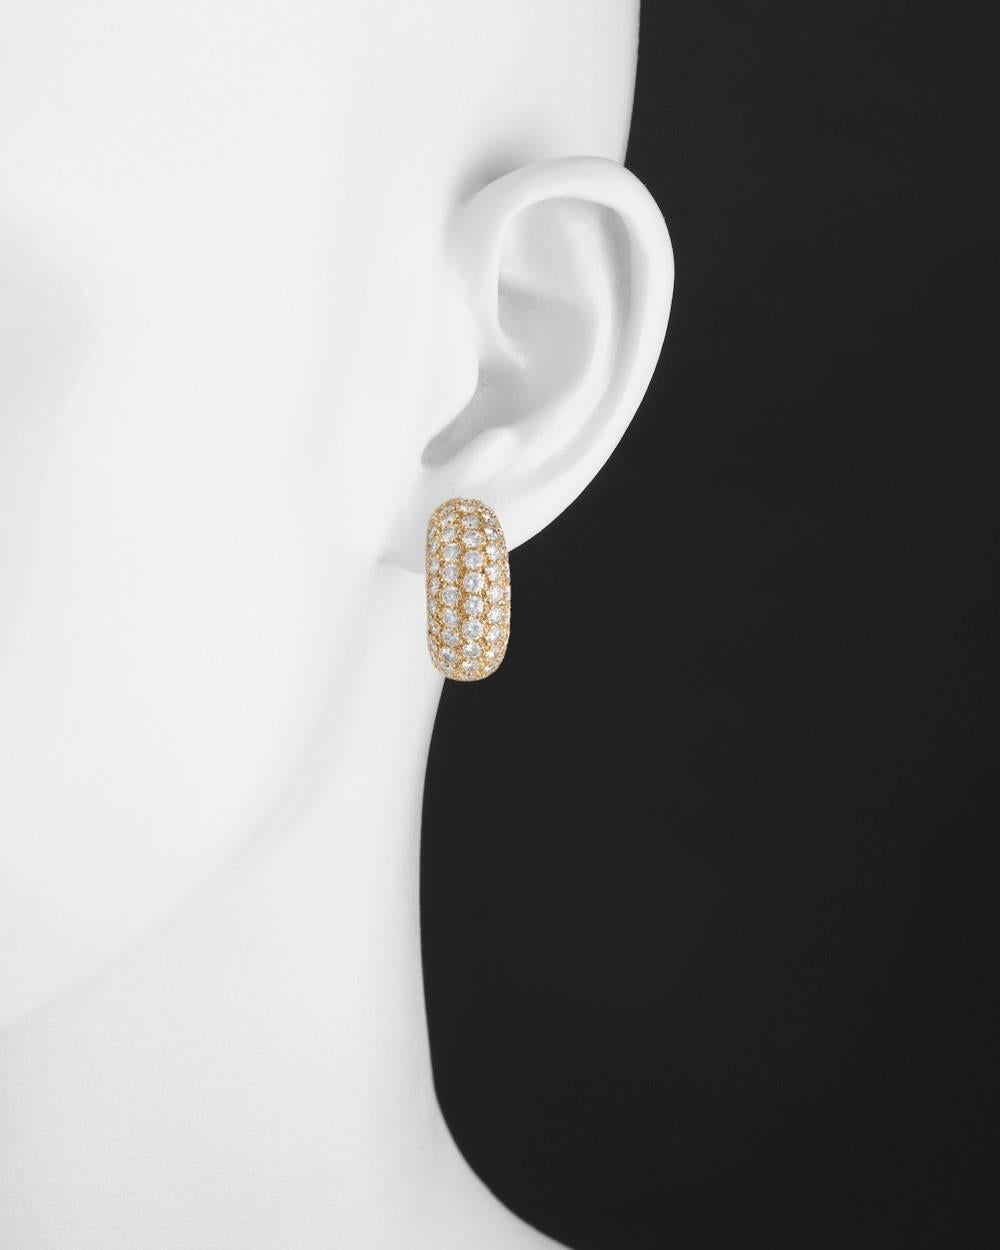 Domed half-hoop earrings, showcasing seven rows of fine colorless round brilliant-cut diamonds, in 18k yellow gold, numbered M41529 and signed Van Cleef & Arpels. 180 diamonds weighing approximately 10.60 total carats (D-E color, VVS1-VVS2